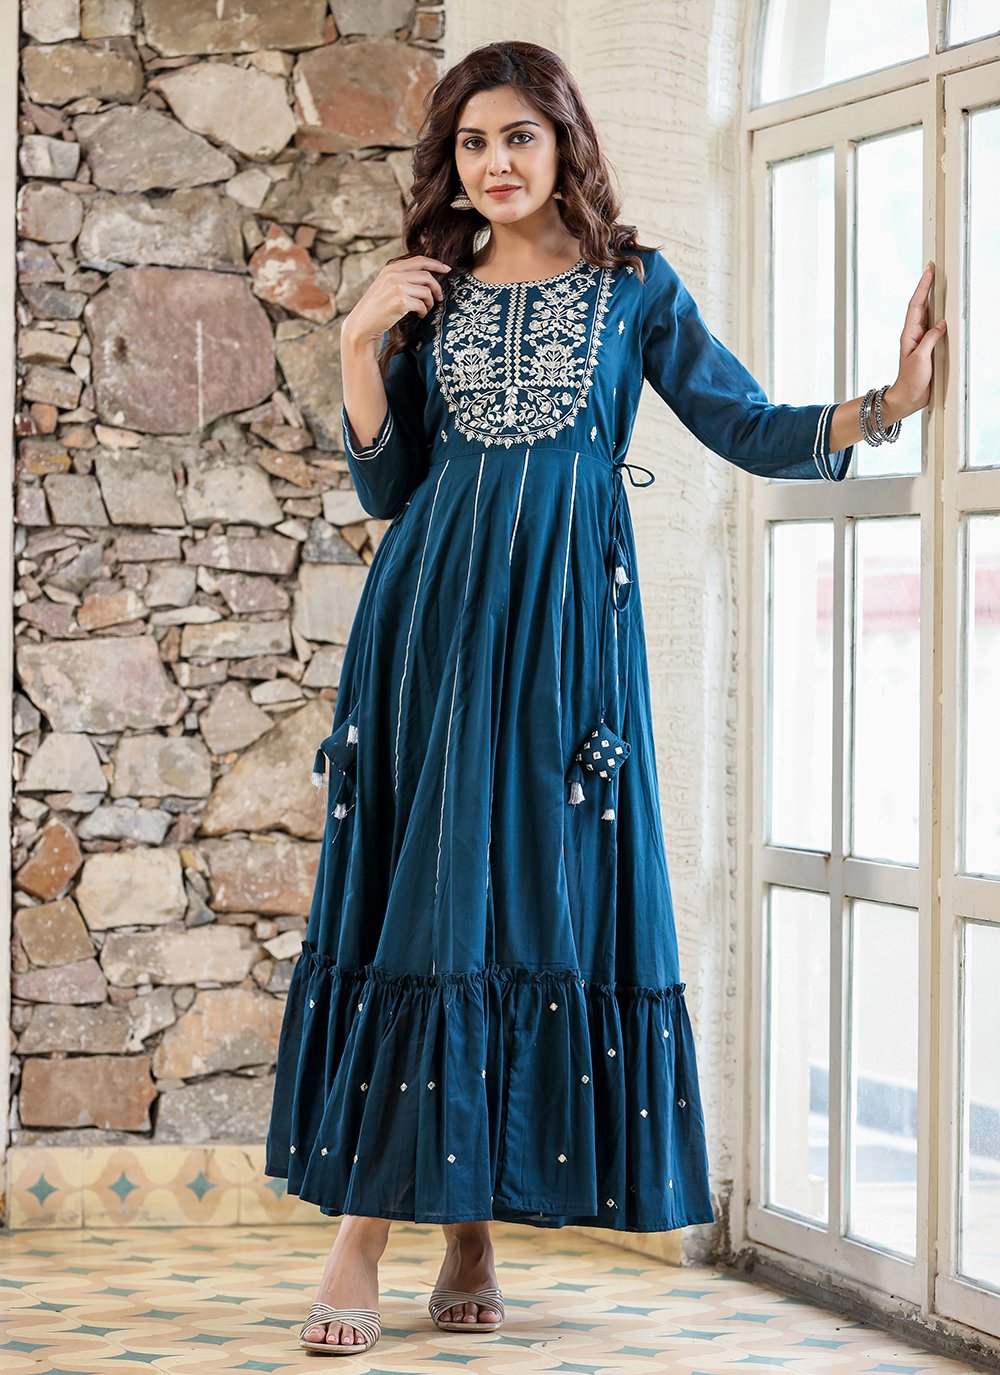 Buy Organza Dress online from Manee Fashion | Cocktail evening dresses,  Party wear indian dresses, Pink evening dress